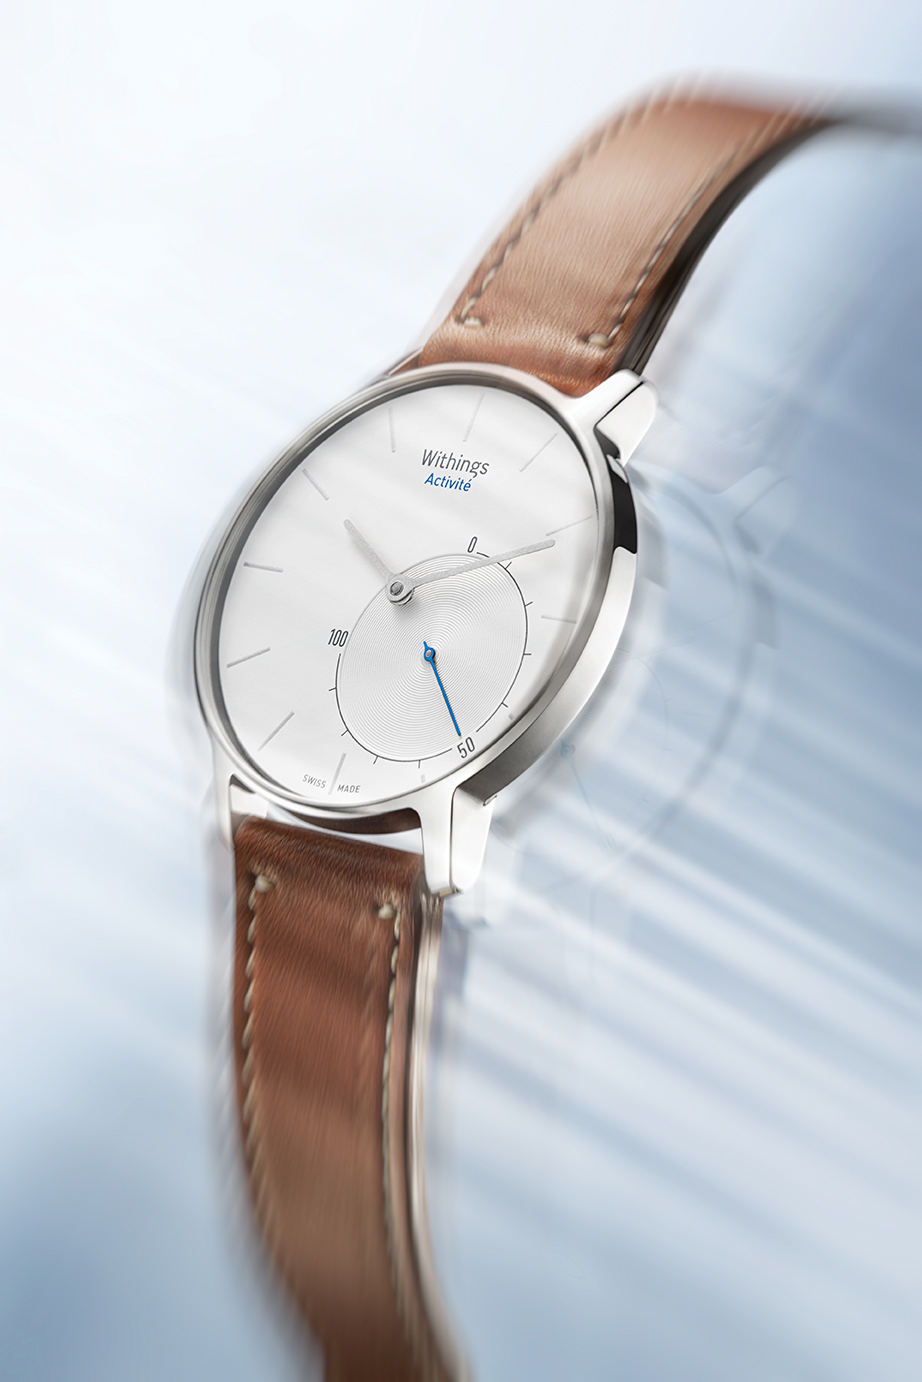 4.Withings_Activité_silver_move